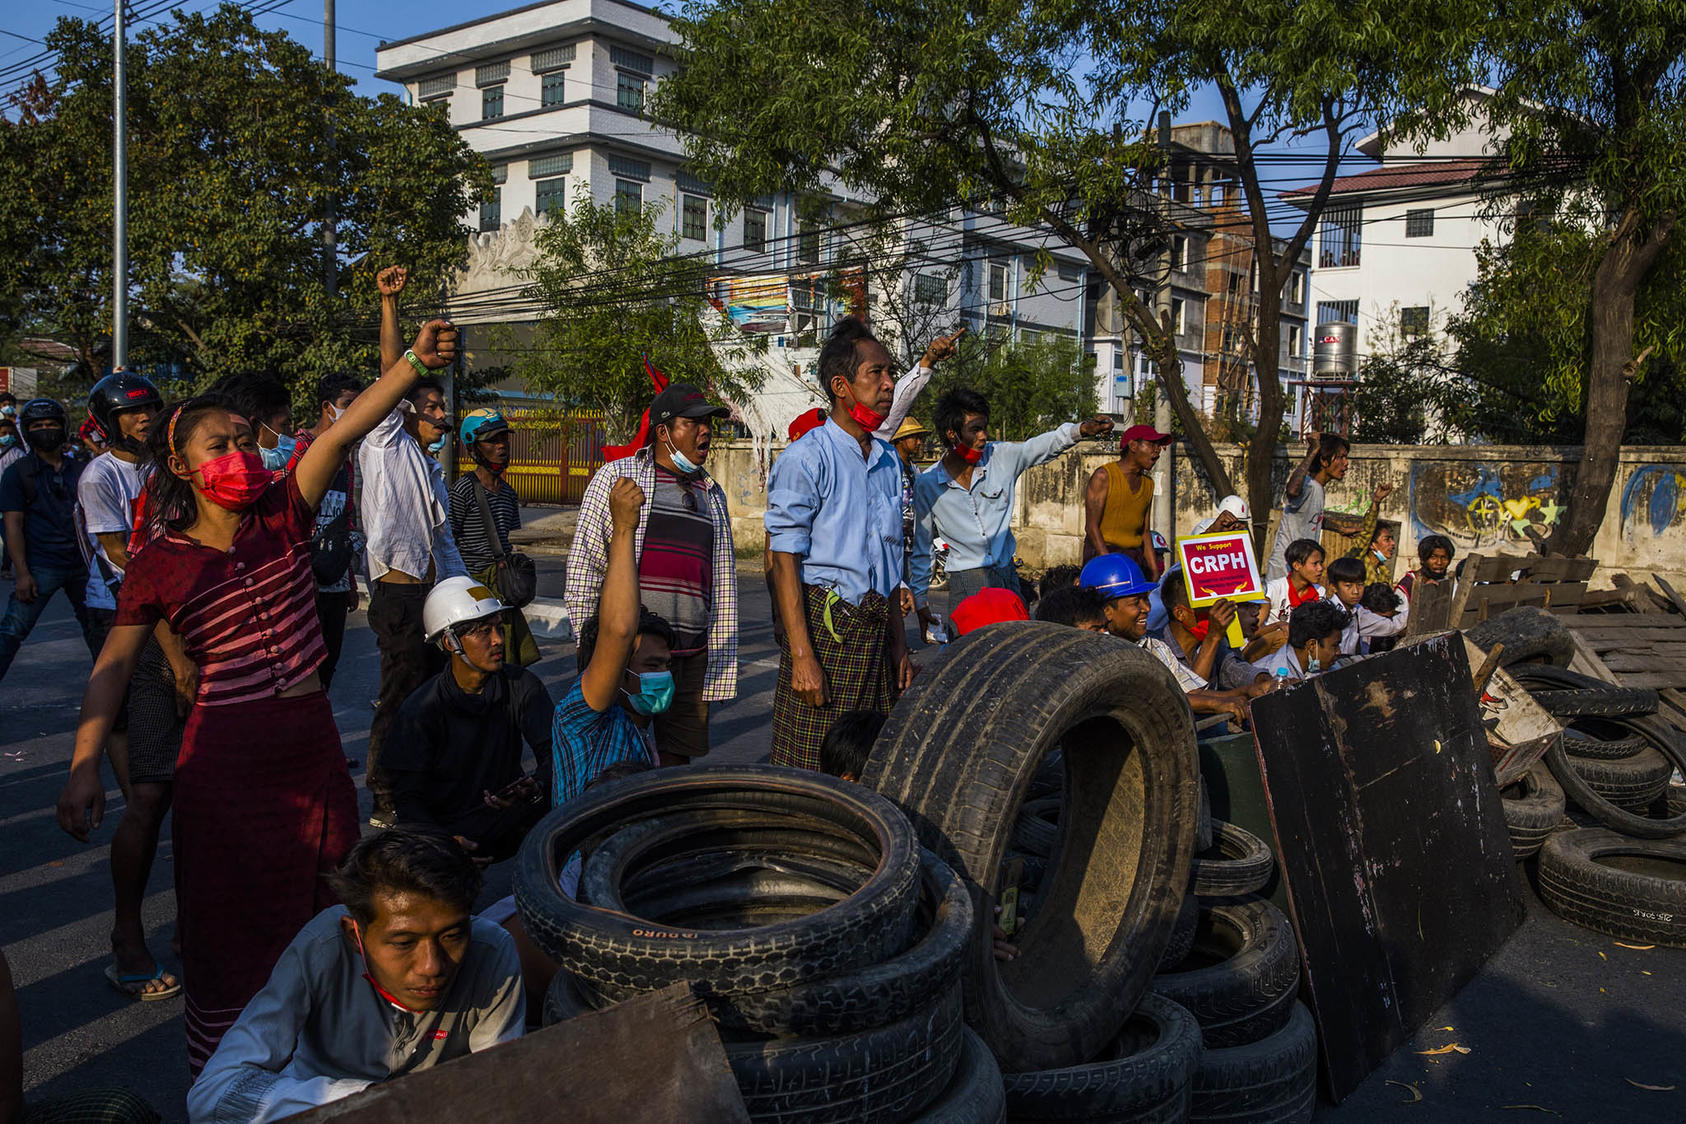 Protesters against the military government in Mandalay, Myanmar, on Feb. 28, 2021. Mandalay, the second-largest city in Myanmar, has been a center of resistance since the coup on Feb. 1. (The New York Times)